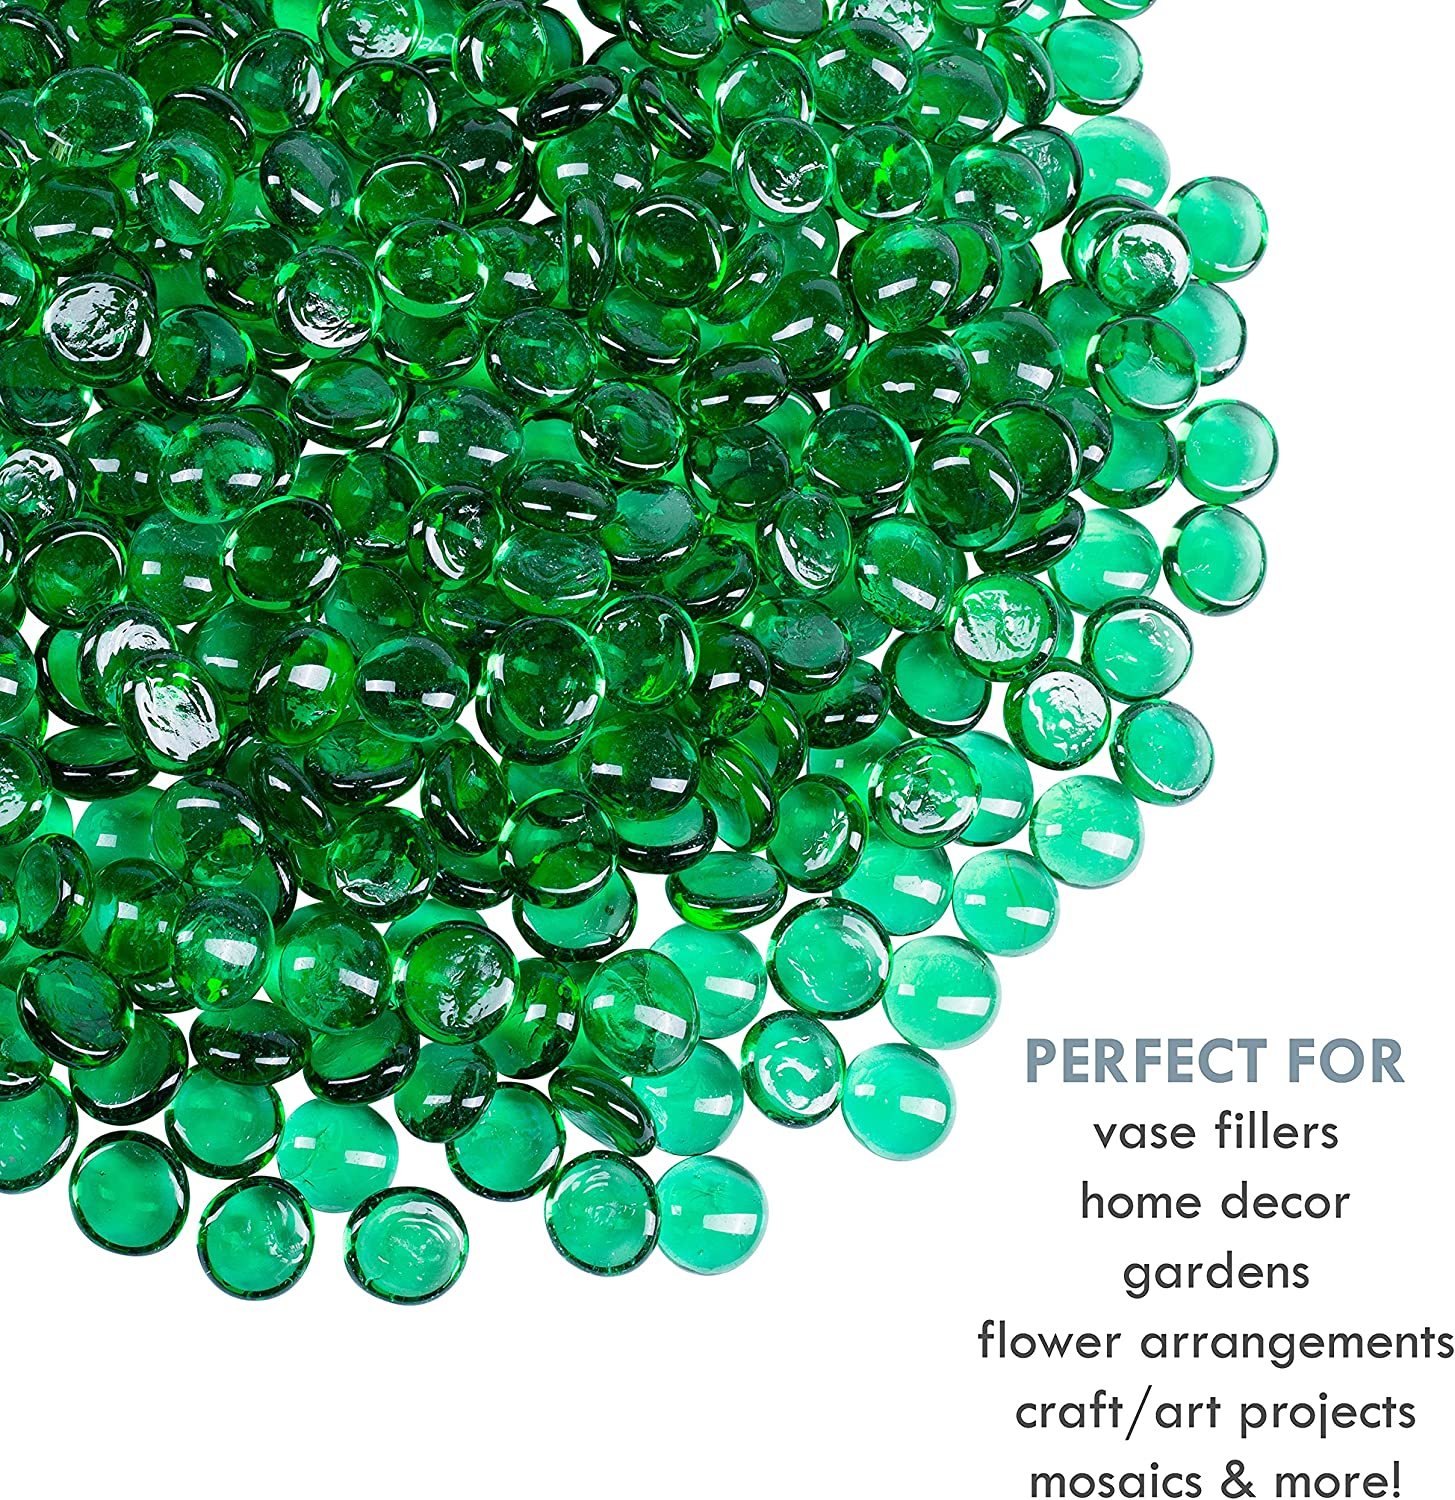 Galashield Green Flat Glass Marbles for Vases Glass Gems Beads Pebbles Vase Filler 5 LBS, Approx. 450 PCS - image 3 of 6